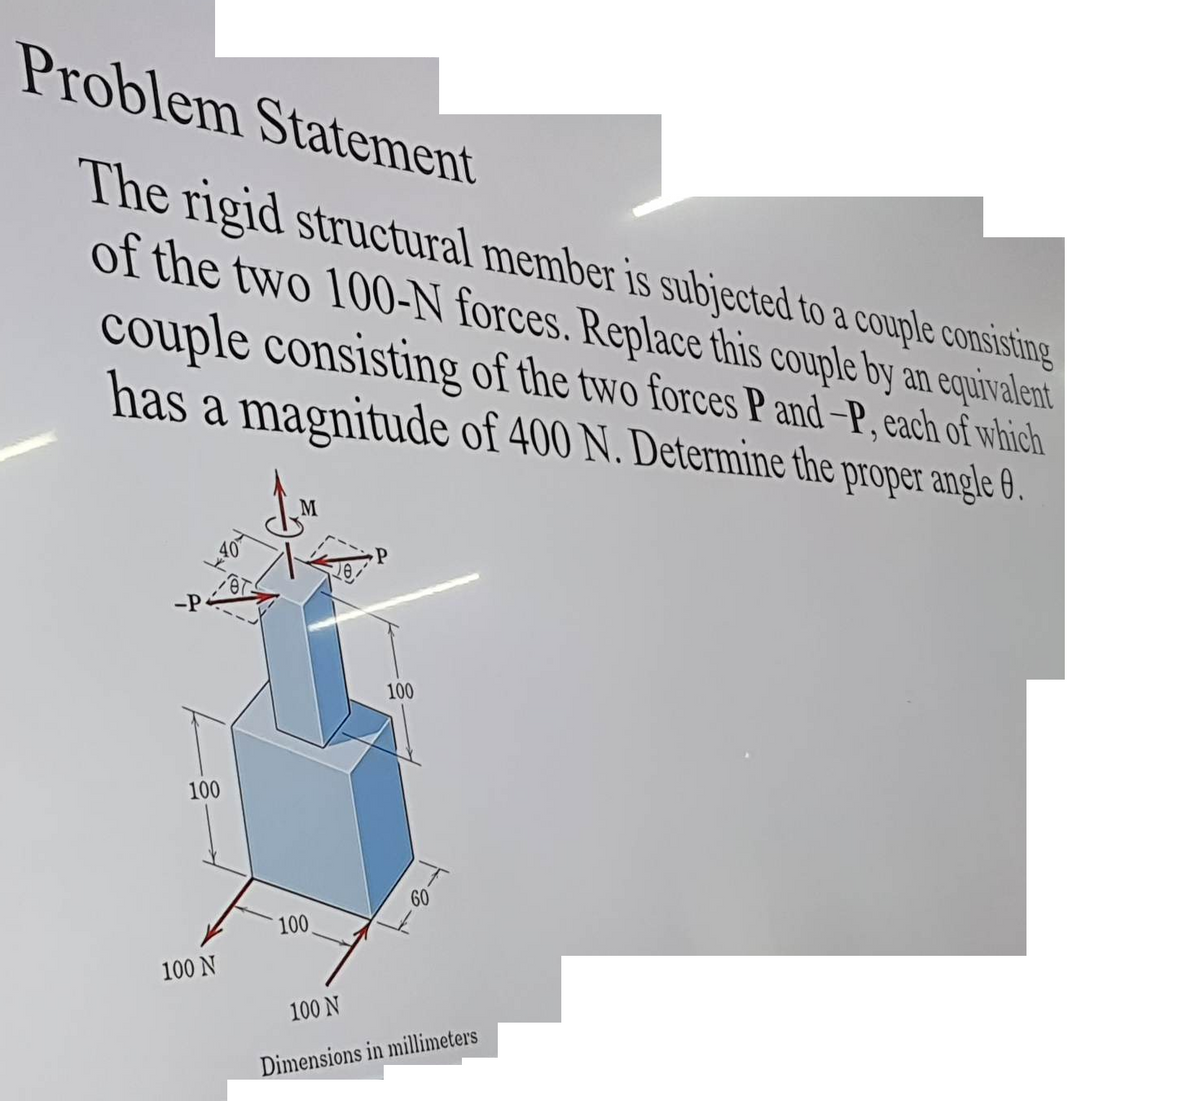 Problem Statement
The rigid structural member is subjected to a couple consisting
of the two 100-N forces. Replace this couple by an equivalent
couple consisting of the two forces P and-P, each of which
has a magnitude of 400 N. Determine the proper angle 8.
JM
-P
100
100 N
**
100
28
P
100
T
60
100 N
Dimensions in millimeters